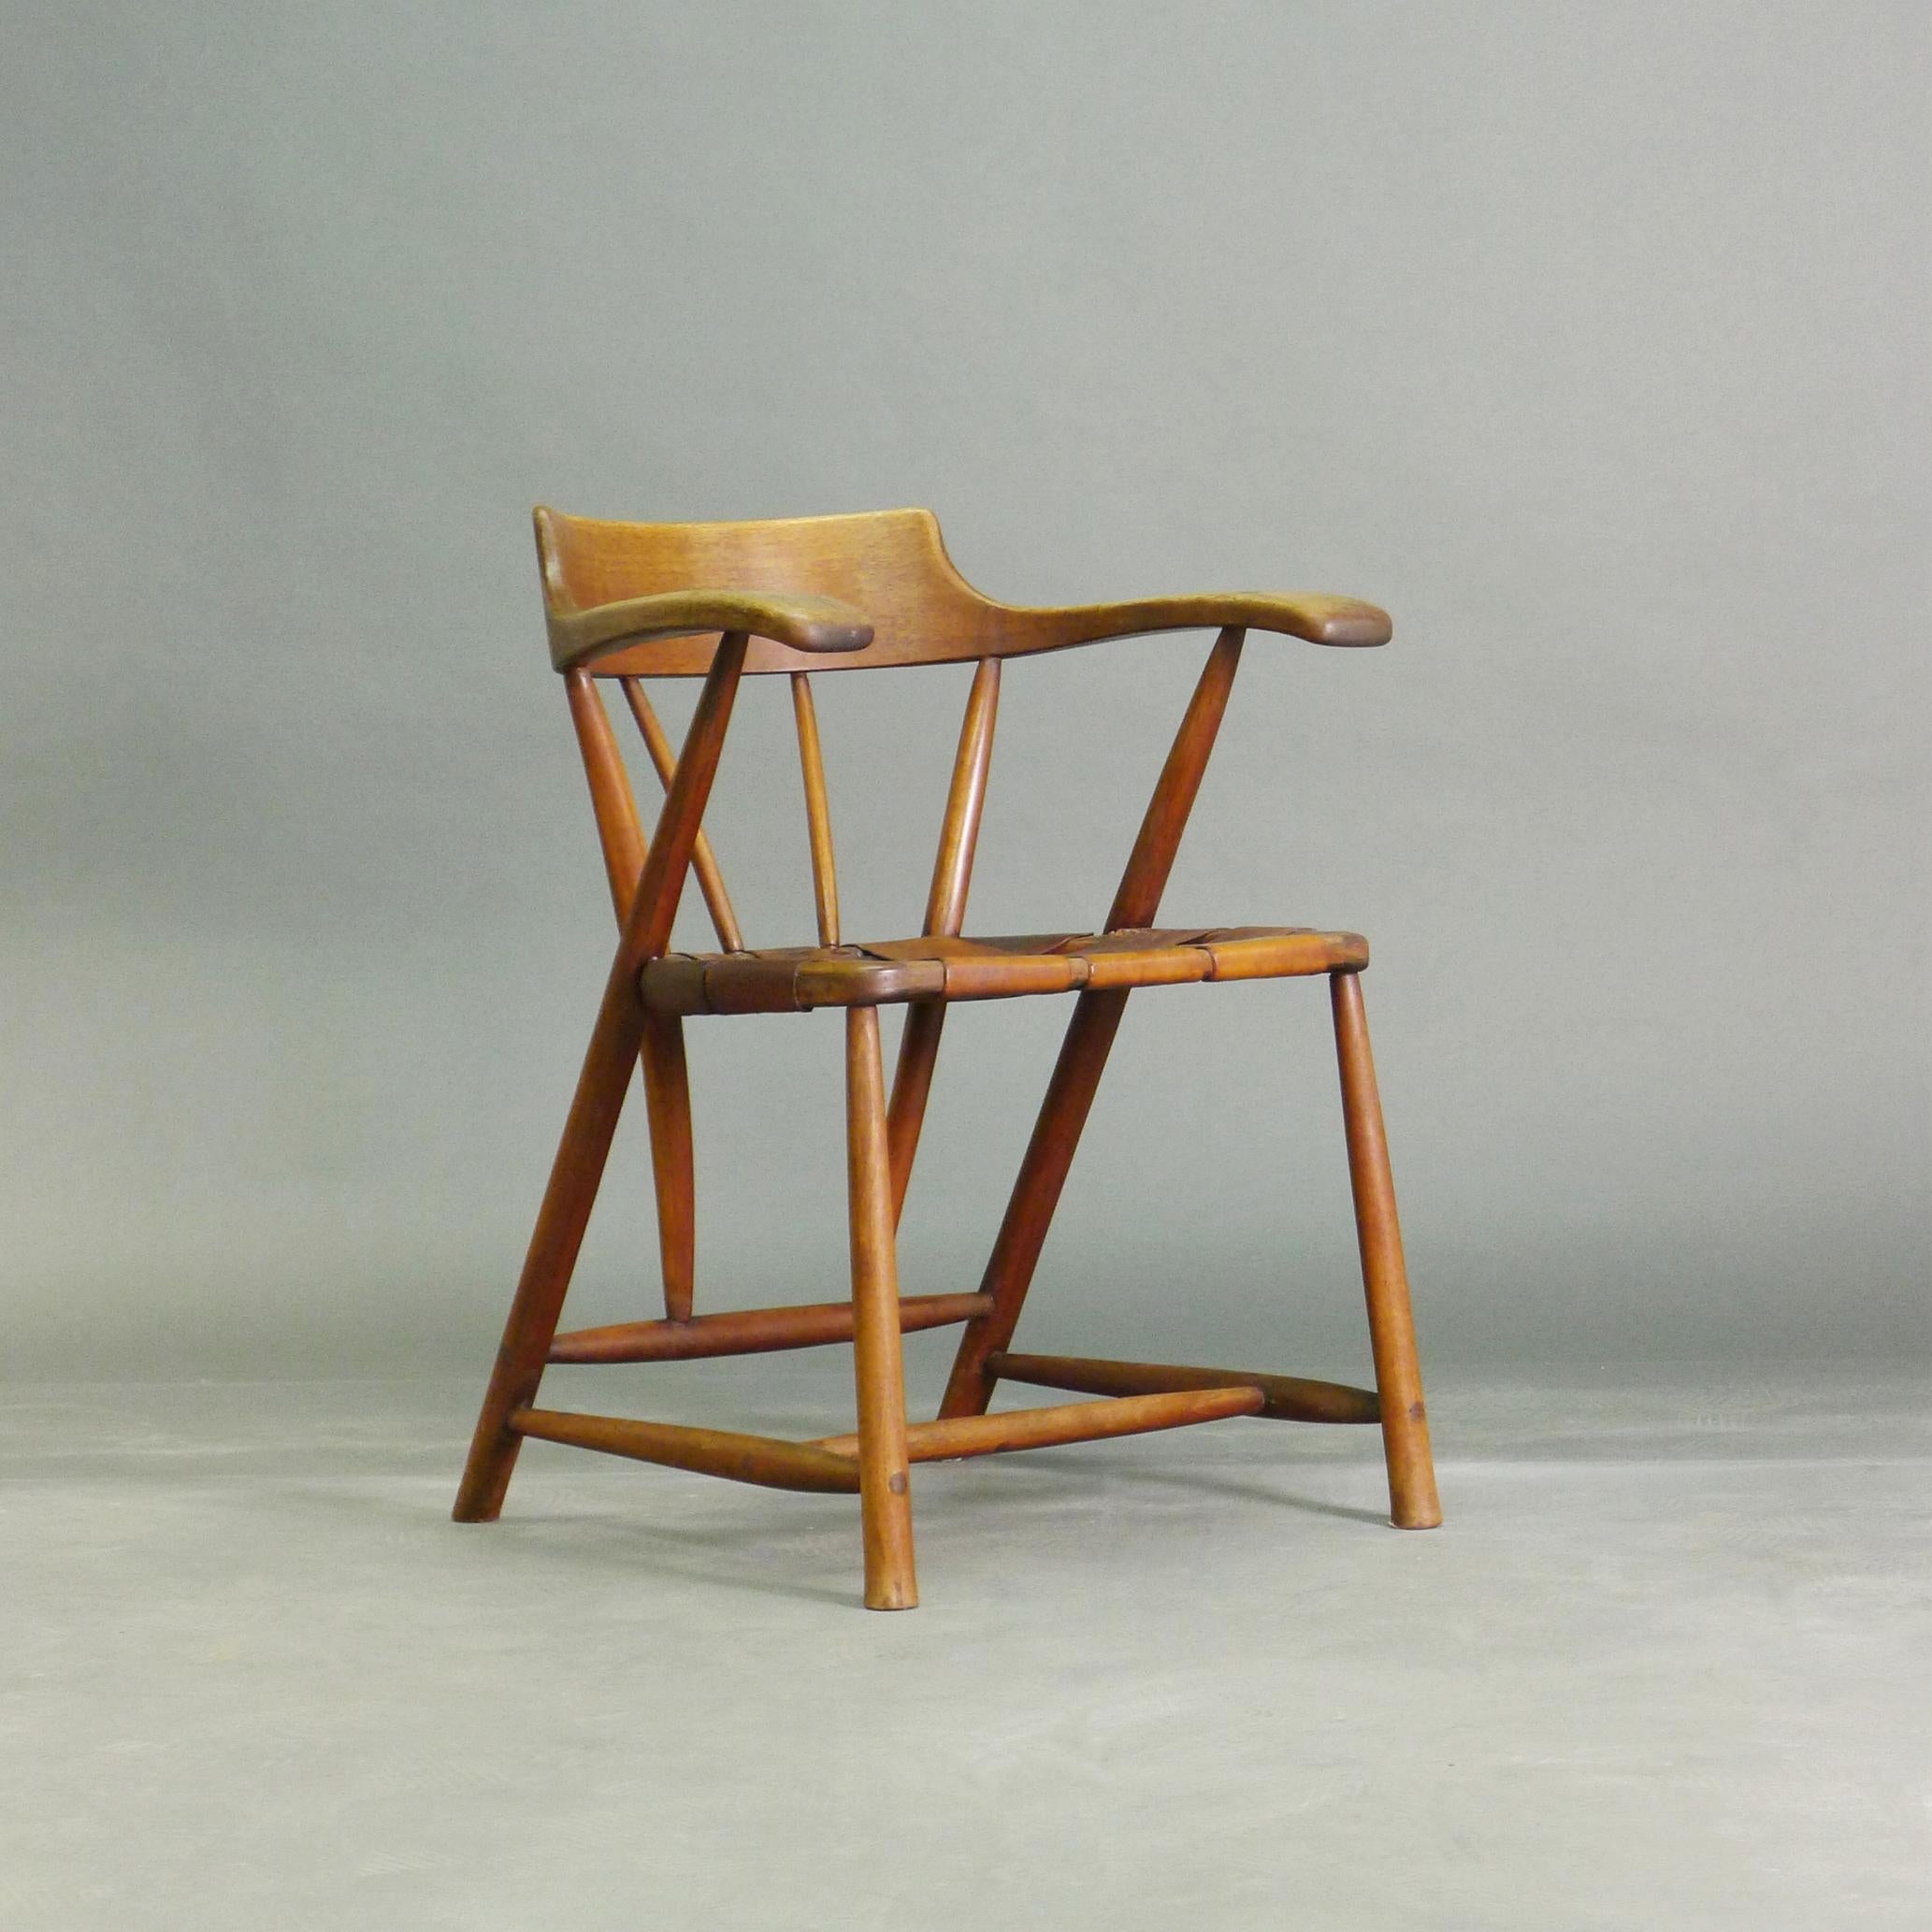 Wharton Esherick, Captains Chair, walnut and leather, initialled and dated 1951 For Sale 2